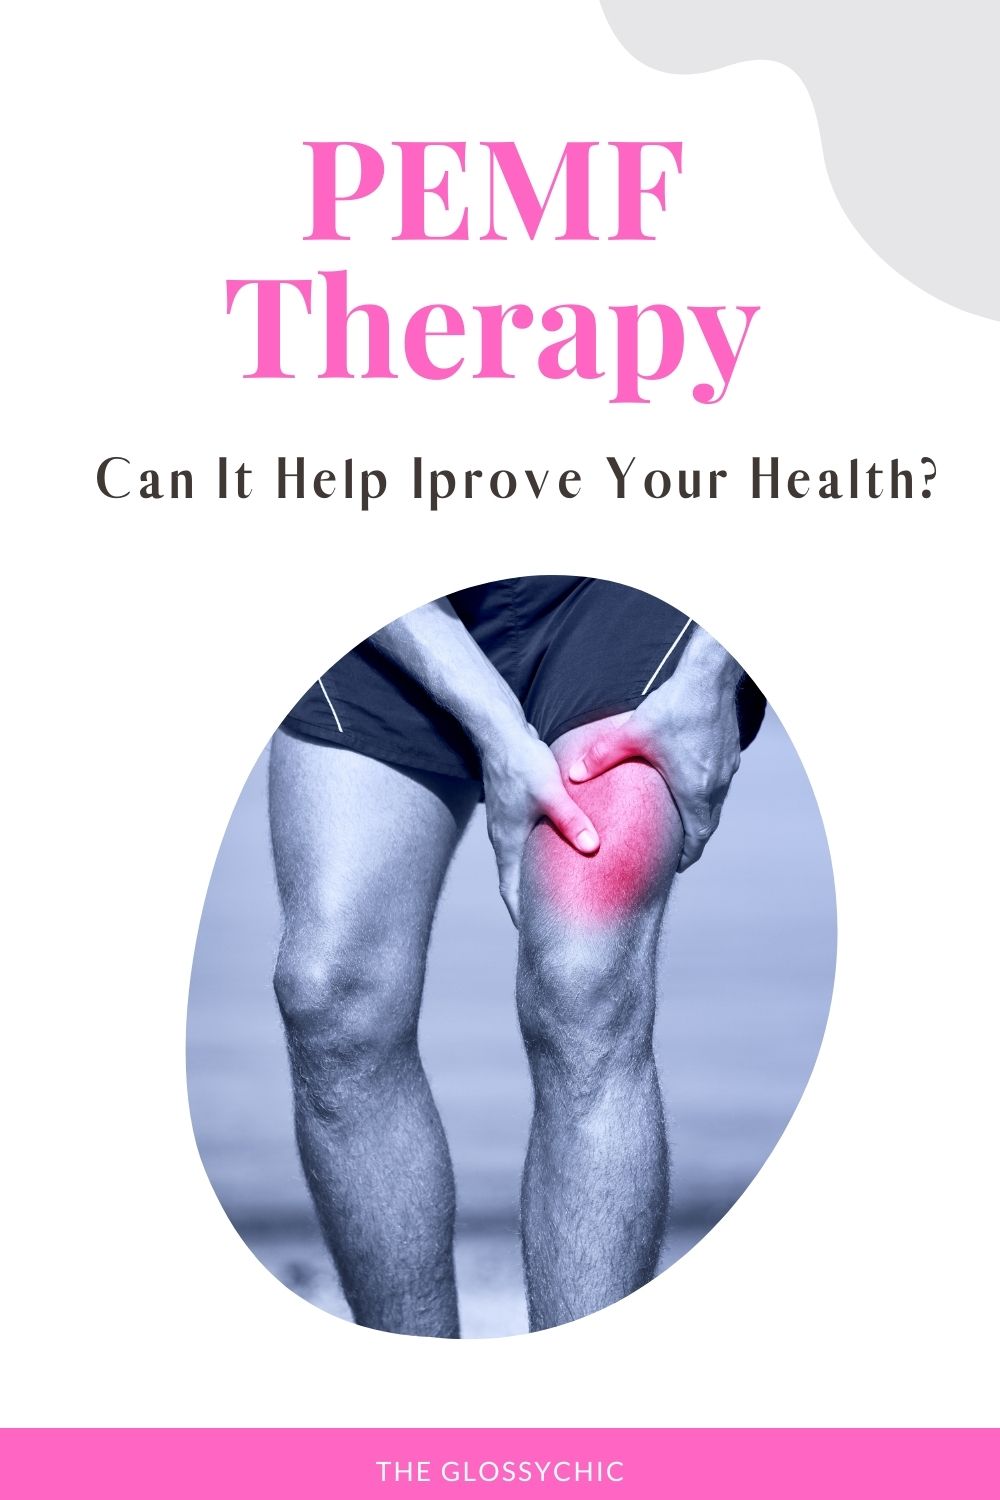 Can PEMF Therapy Help Improve Your Health?